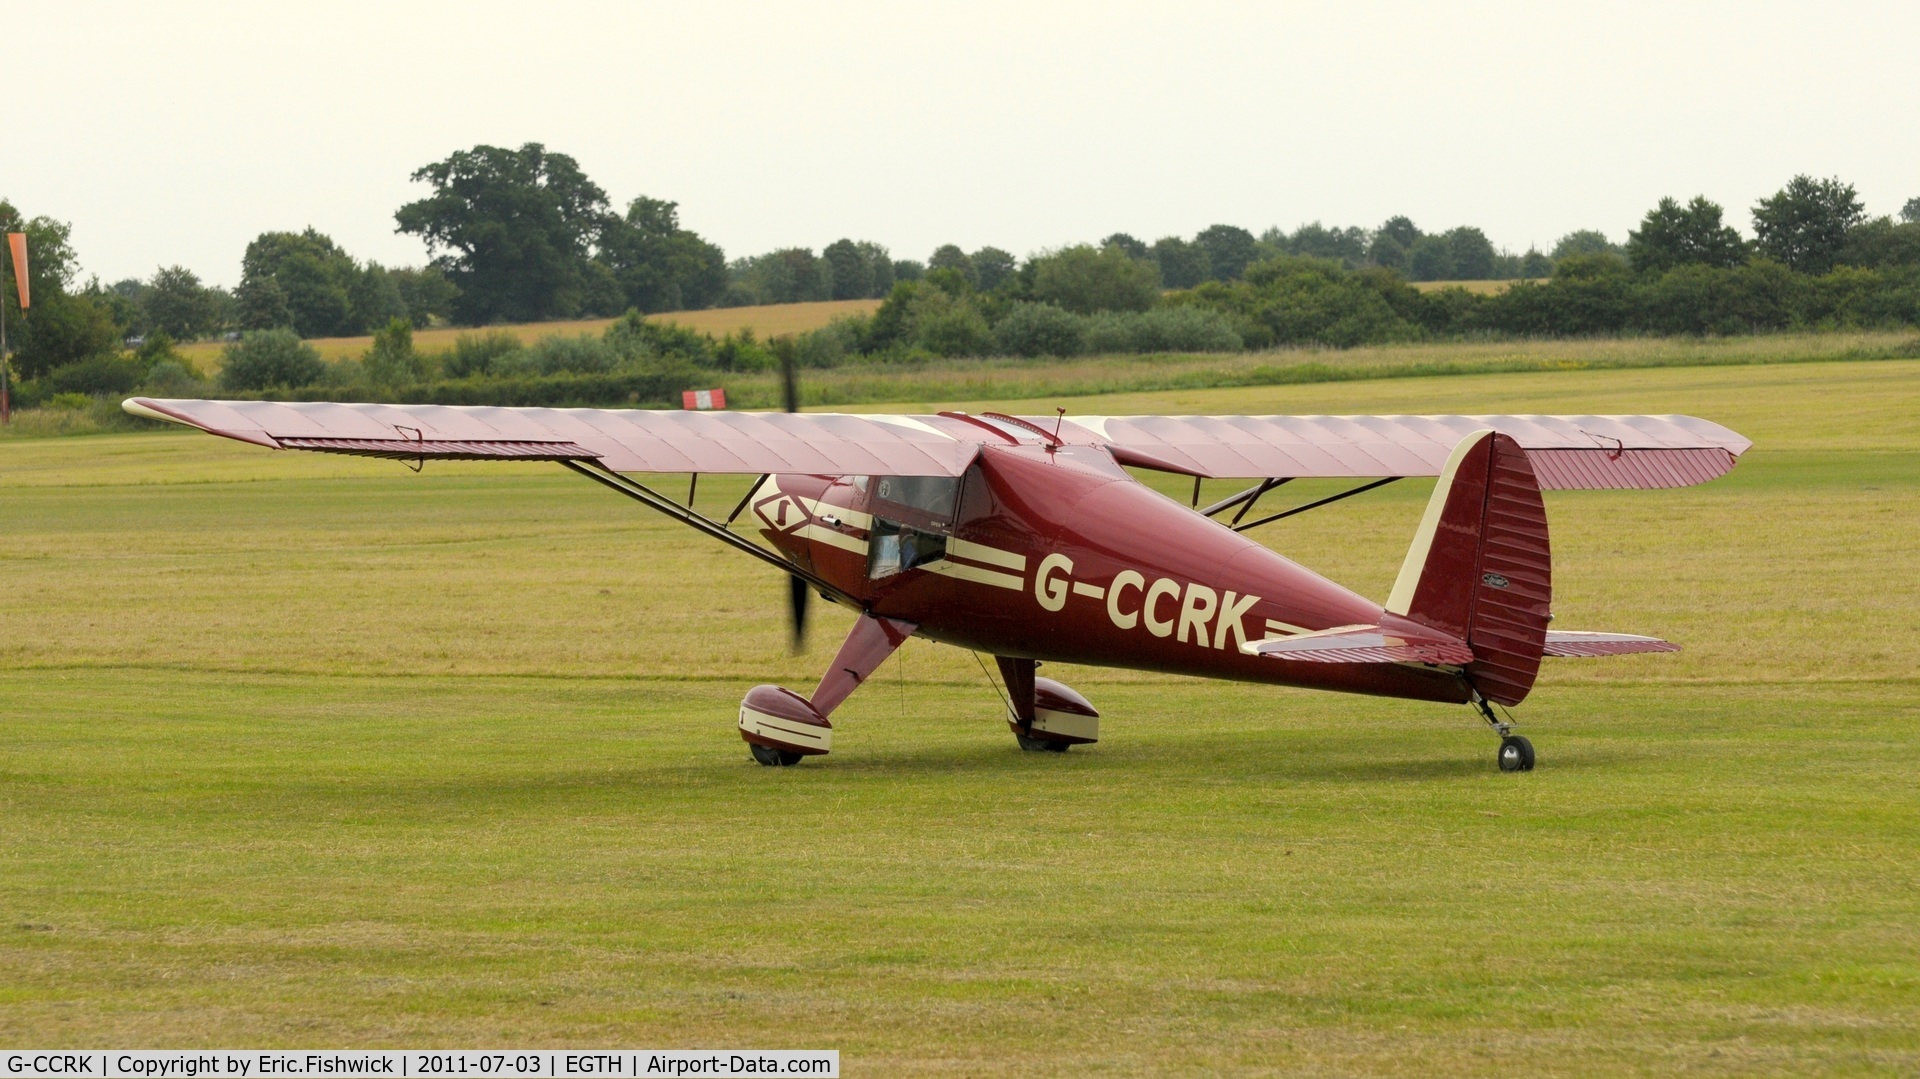 G-CCRK, 1946 Luscombe 8A C/N 3186, G-CCRK at Shuttleworth Military Pagent Air Display, July 2011